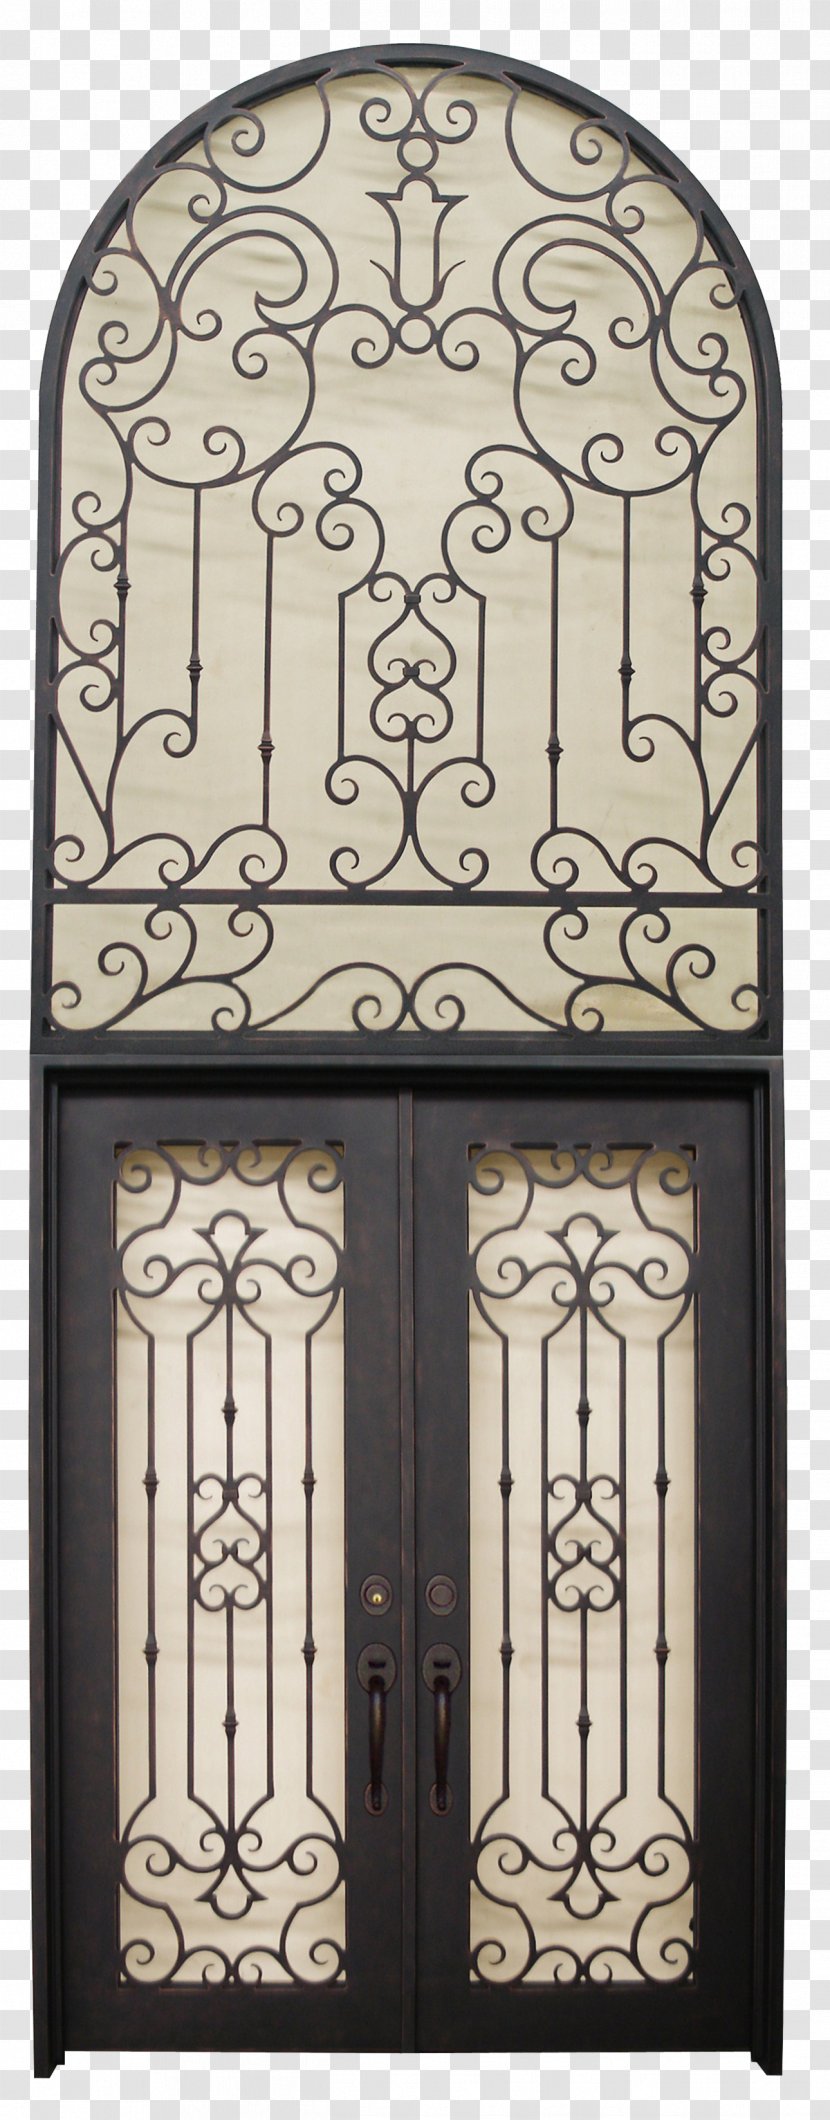 Window Door Arch Iron Sidelight - Gate Transparent PNG